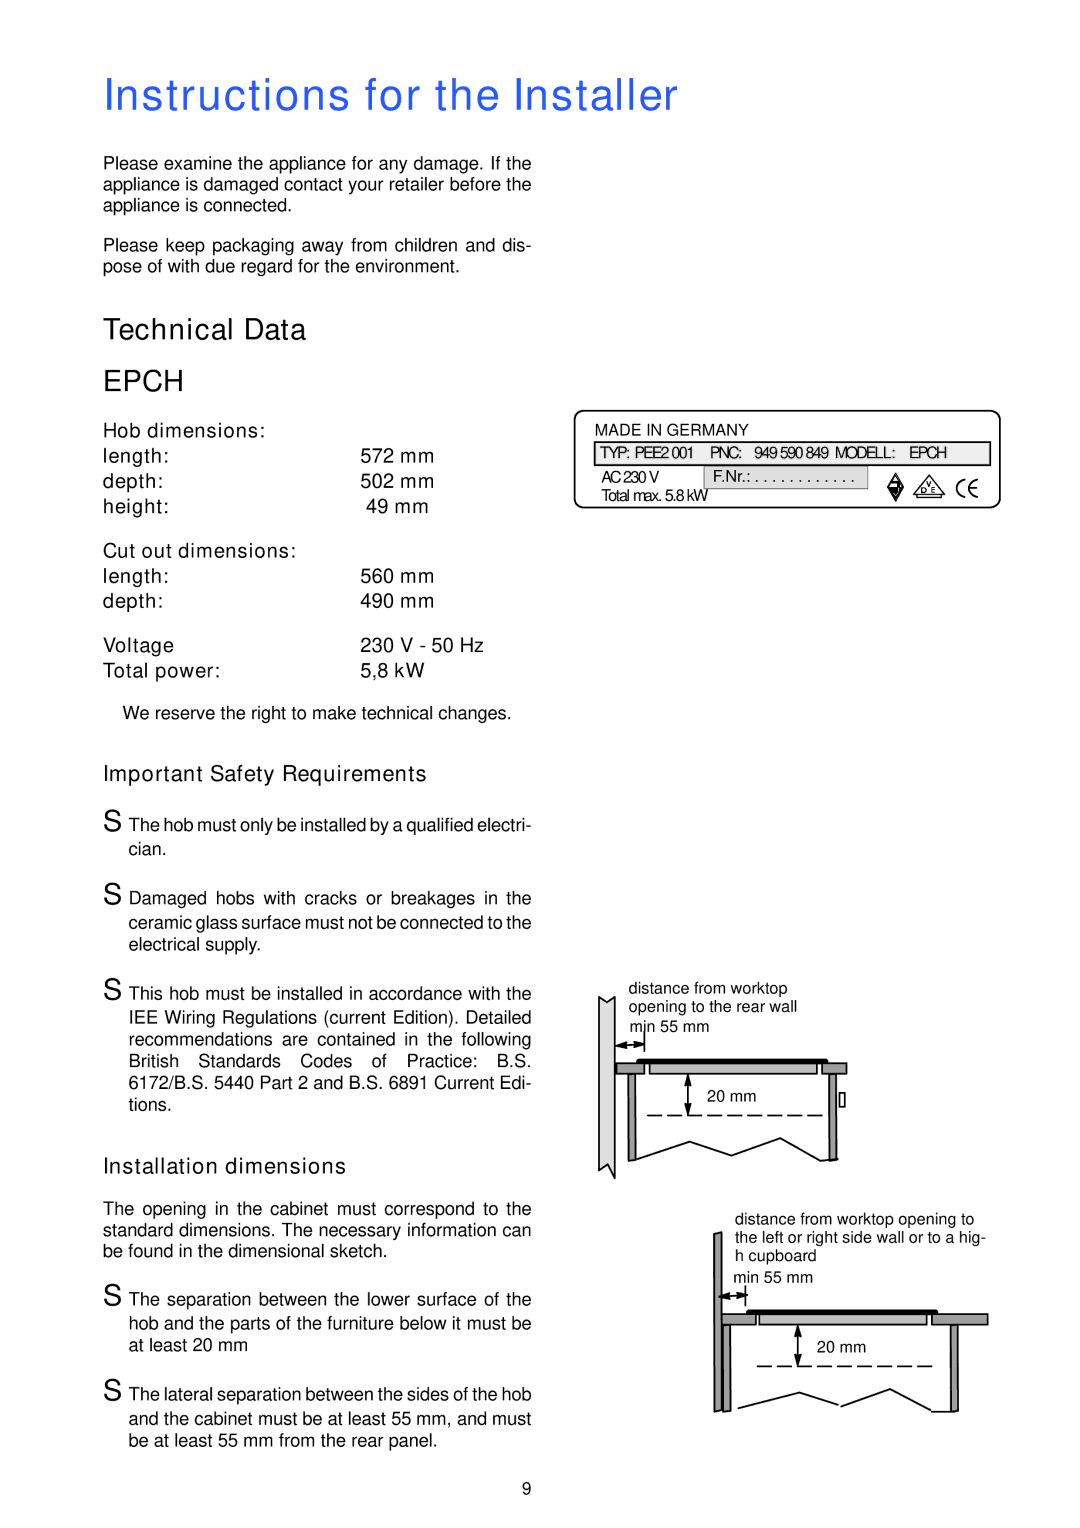 Electrolux U20452 manual Instructions for the Installer, Important Safety Requirements, Installation dimensions 